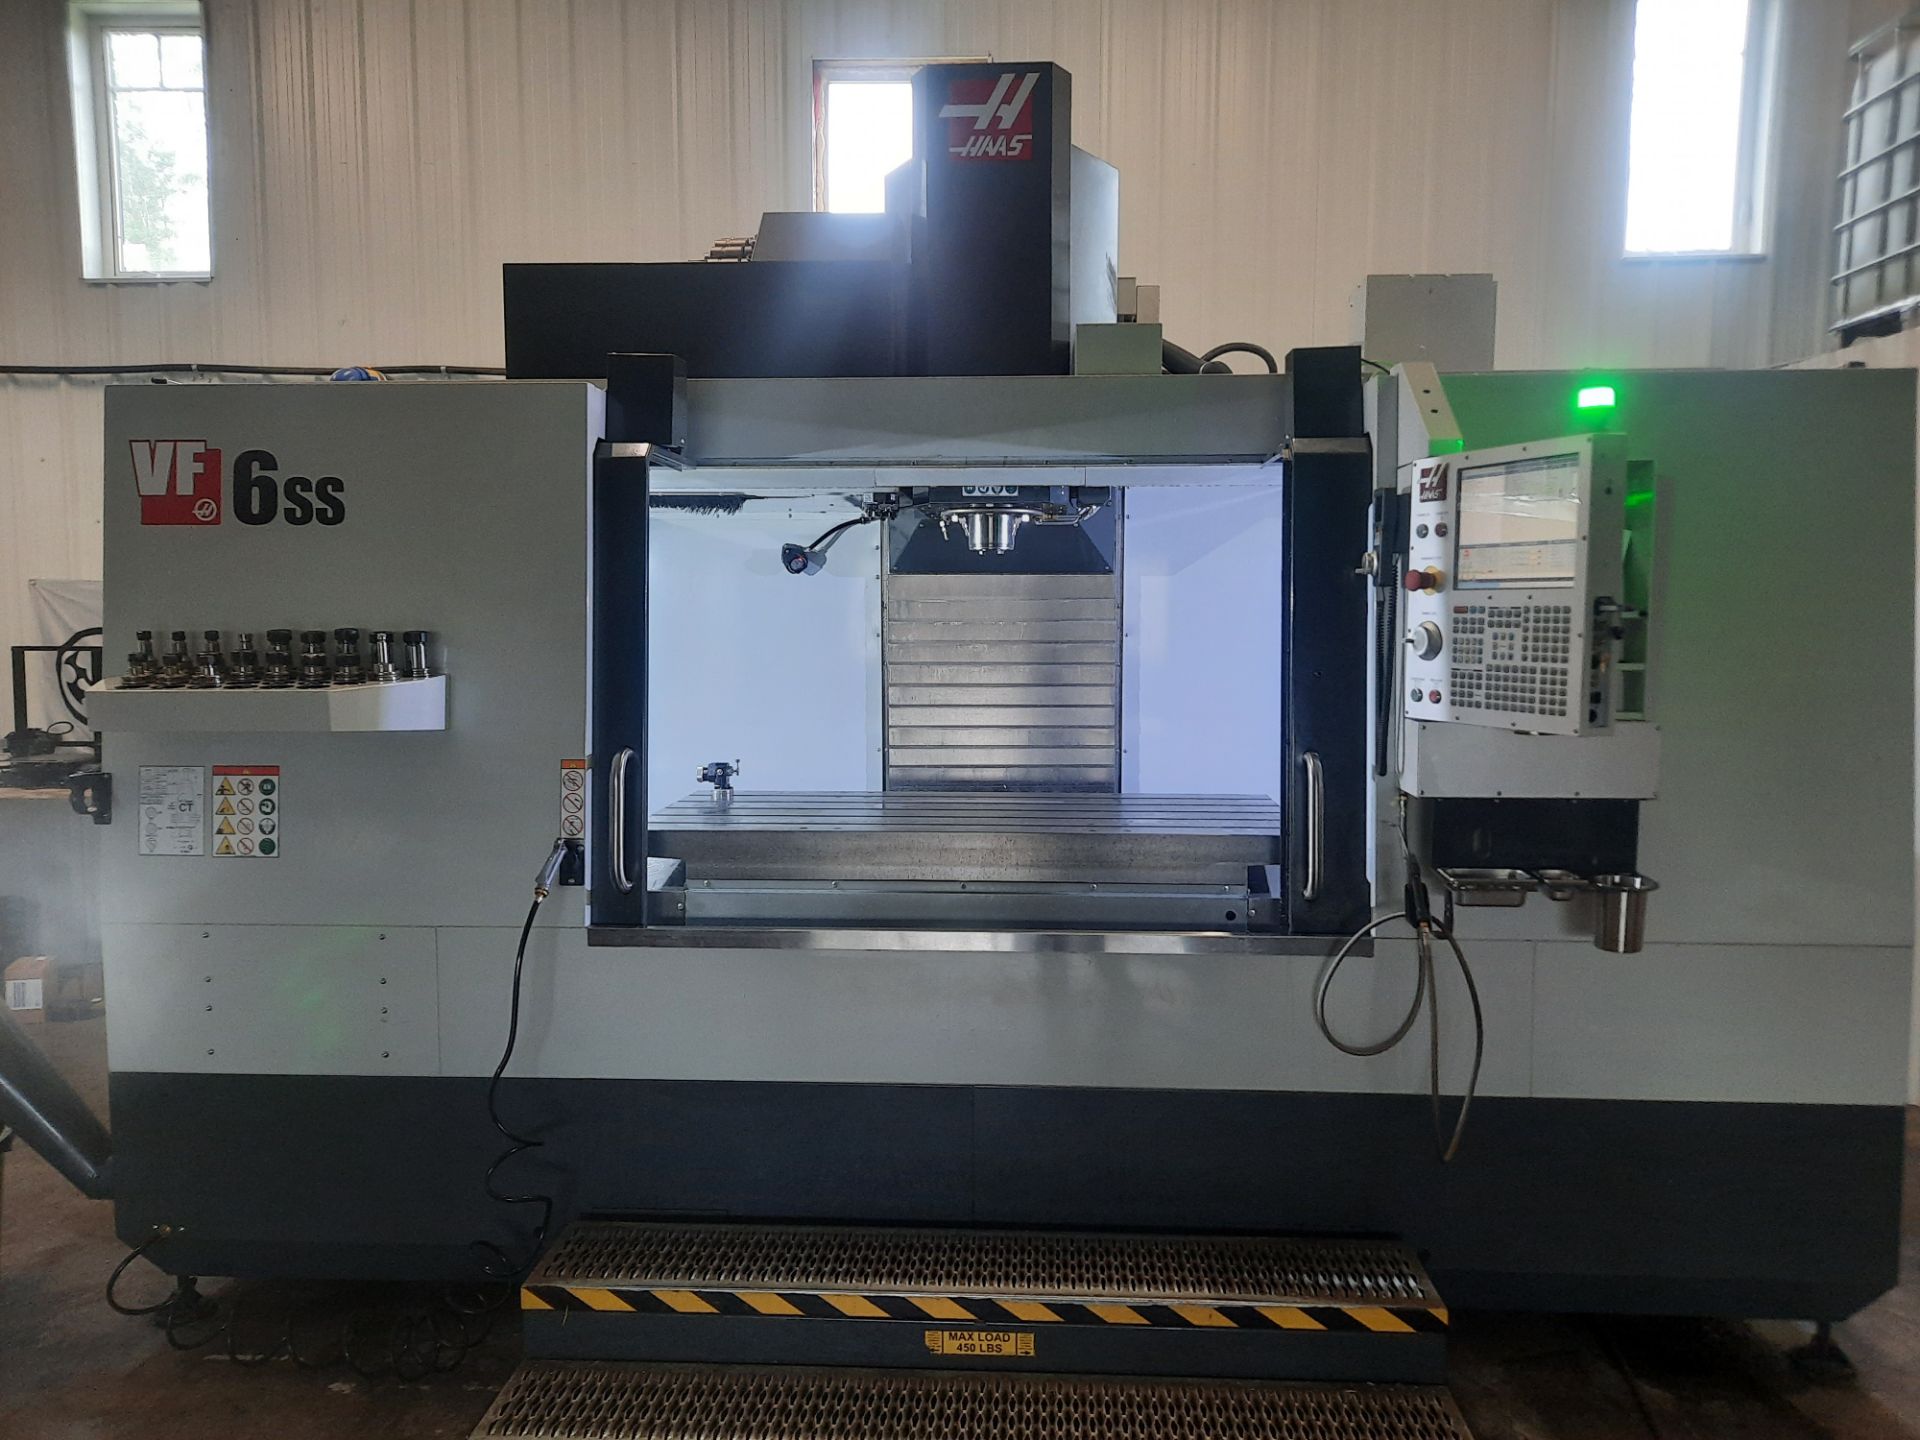 2020 HAAS VF-6SS 5-Axis 12,000 RPM CNC Vertical Machining Center ***541 Hours***